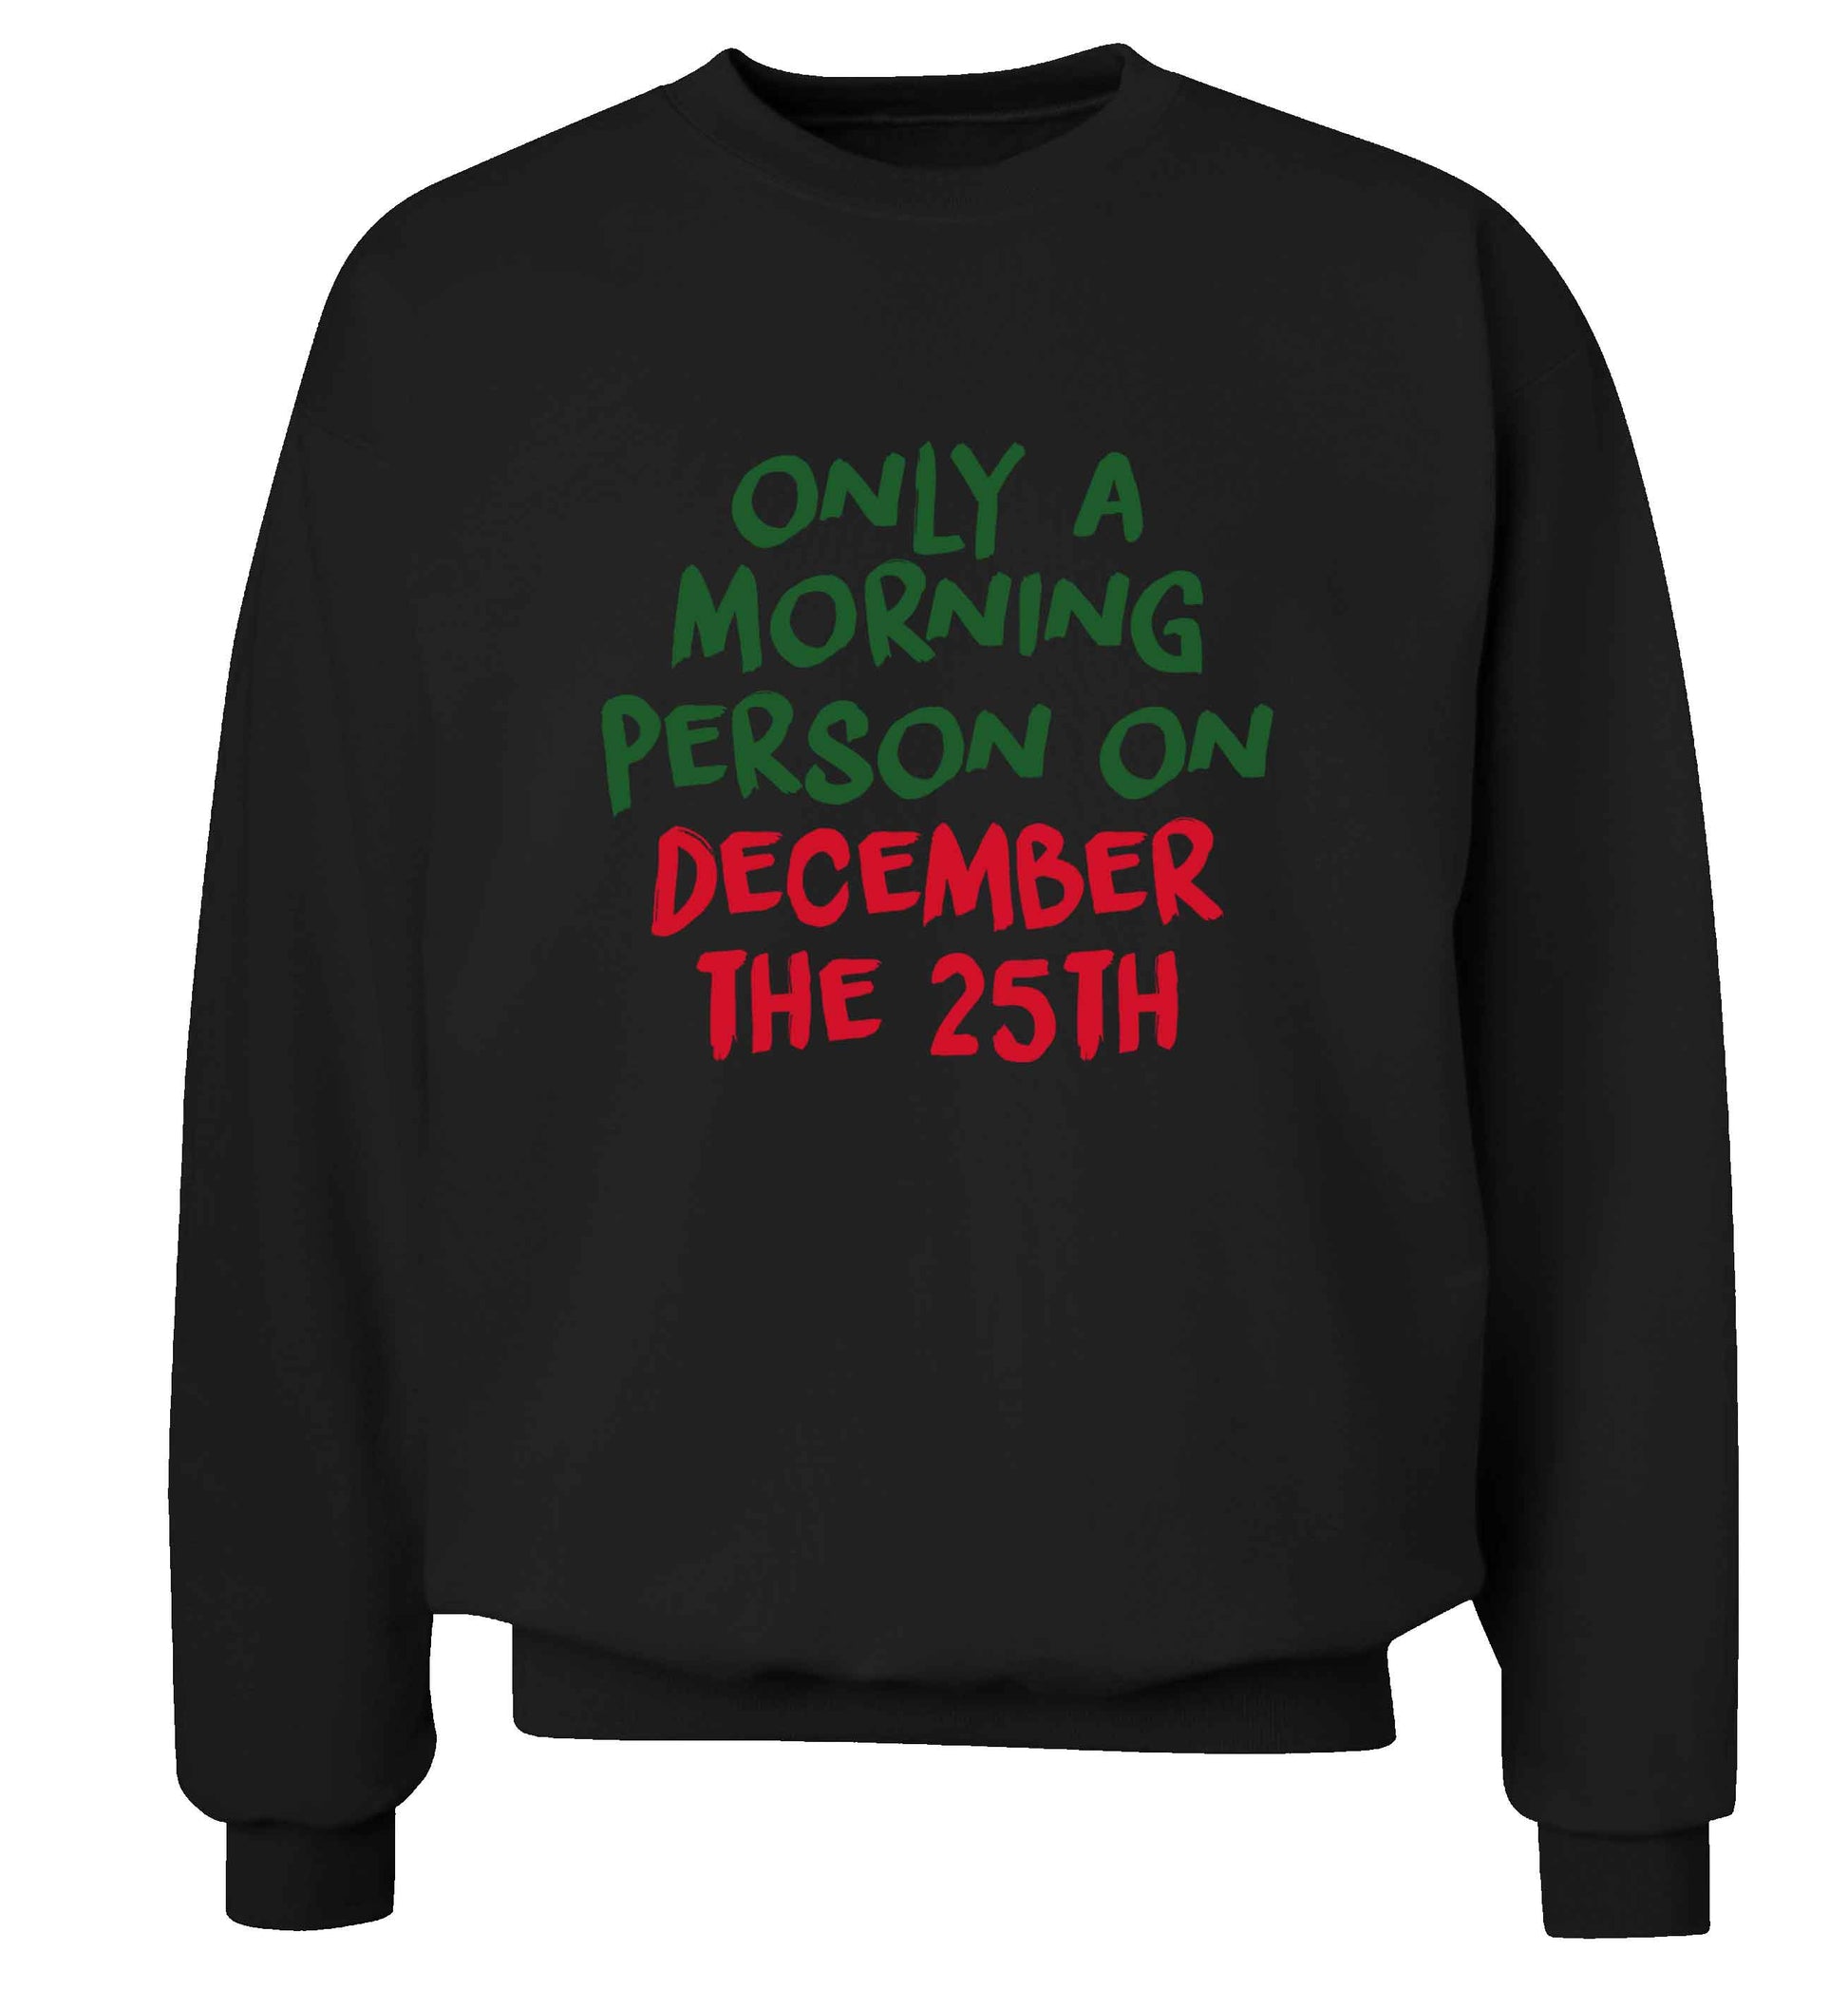 I'm only a morning person on December the 25th adult's unisex black sweater 2XL